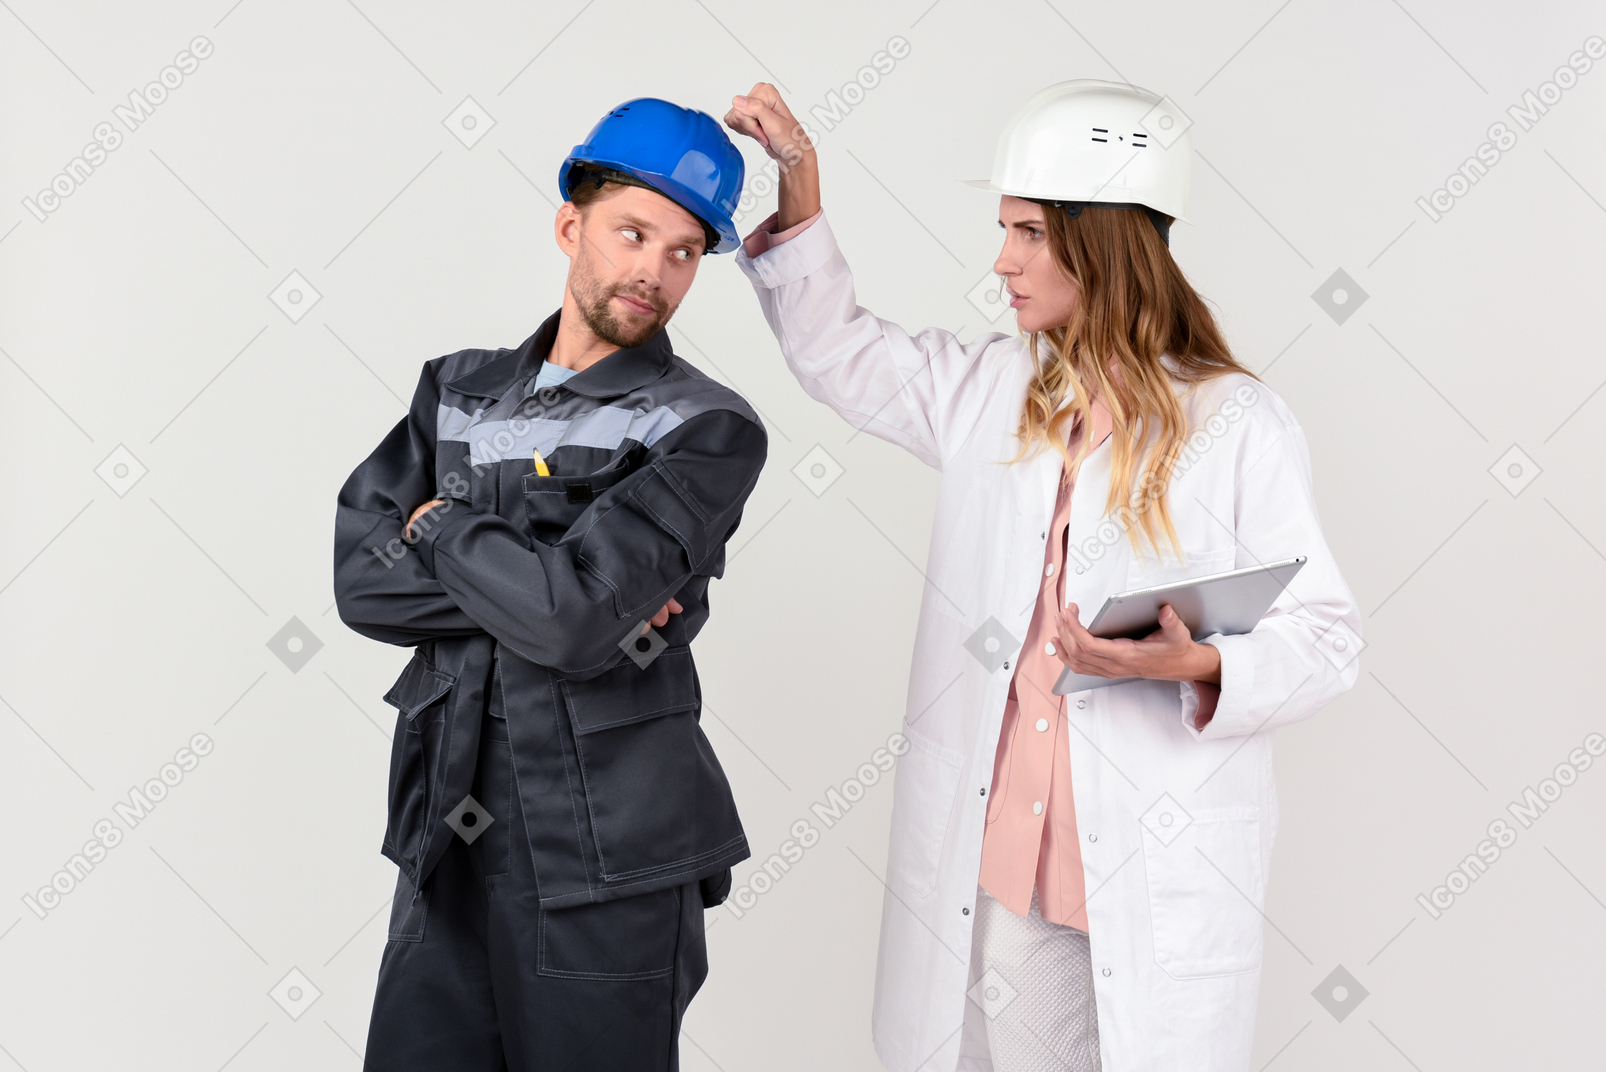 Female and male engineer colleagues discussing some work stuff